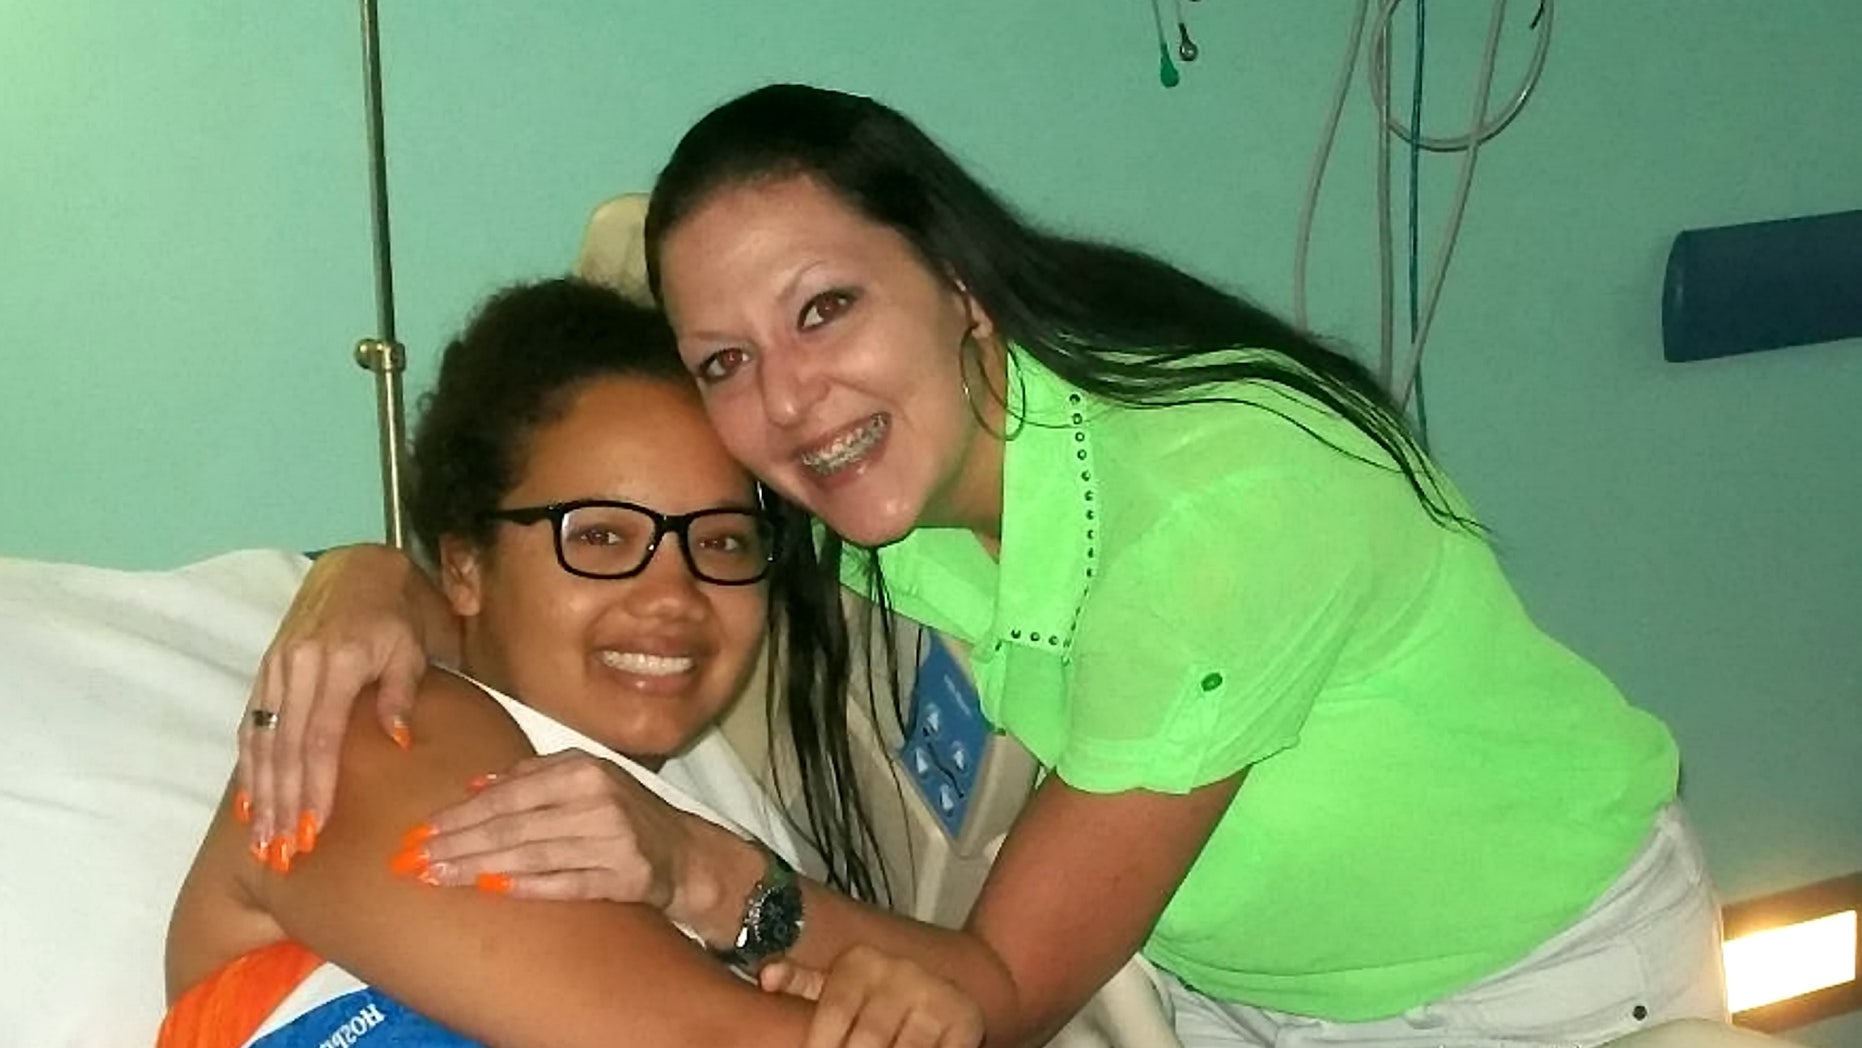 Student who lost leg to infection after alleged Costa Rica attack credits God with helping her heal